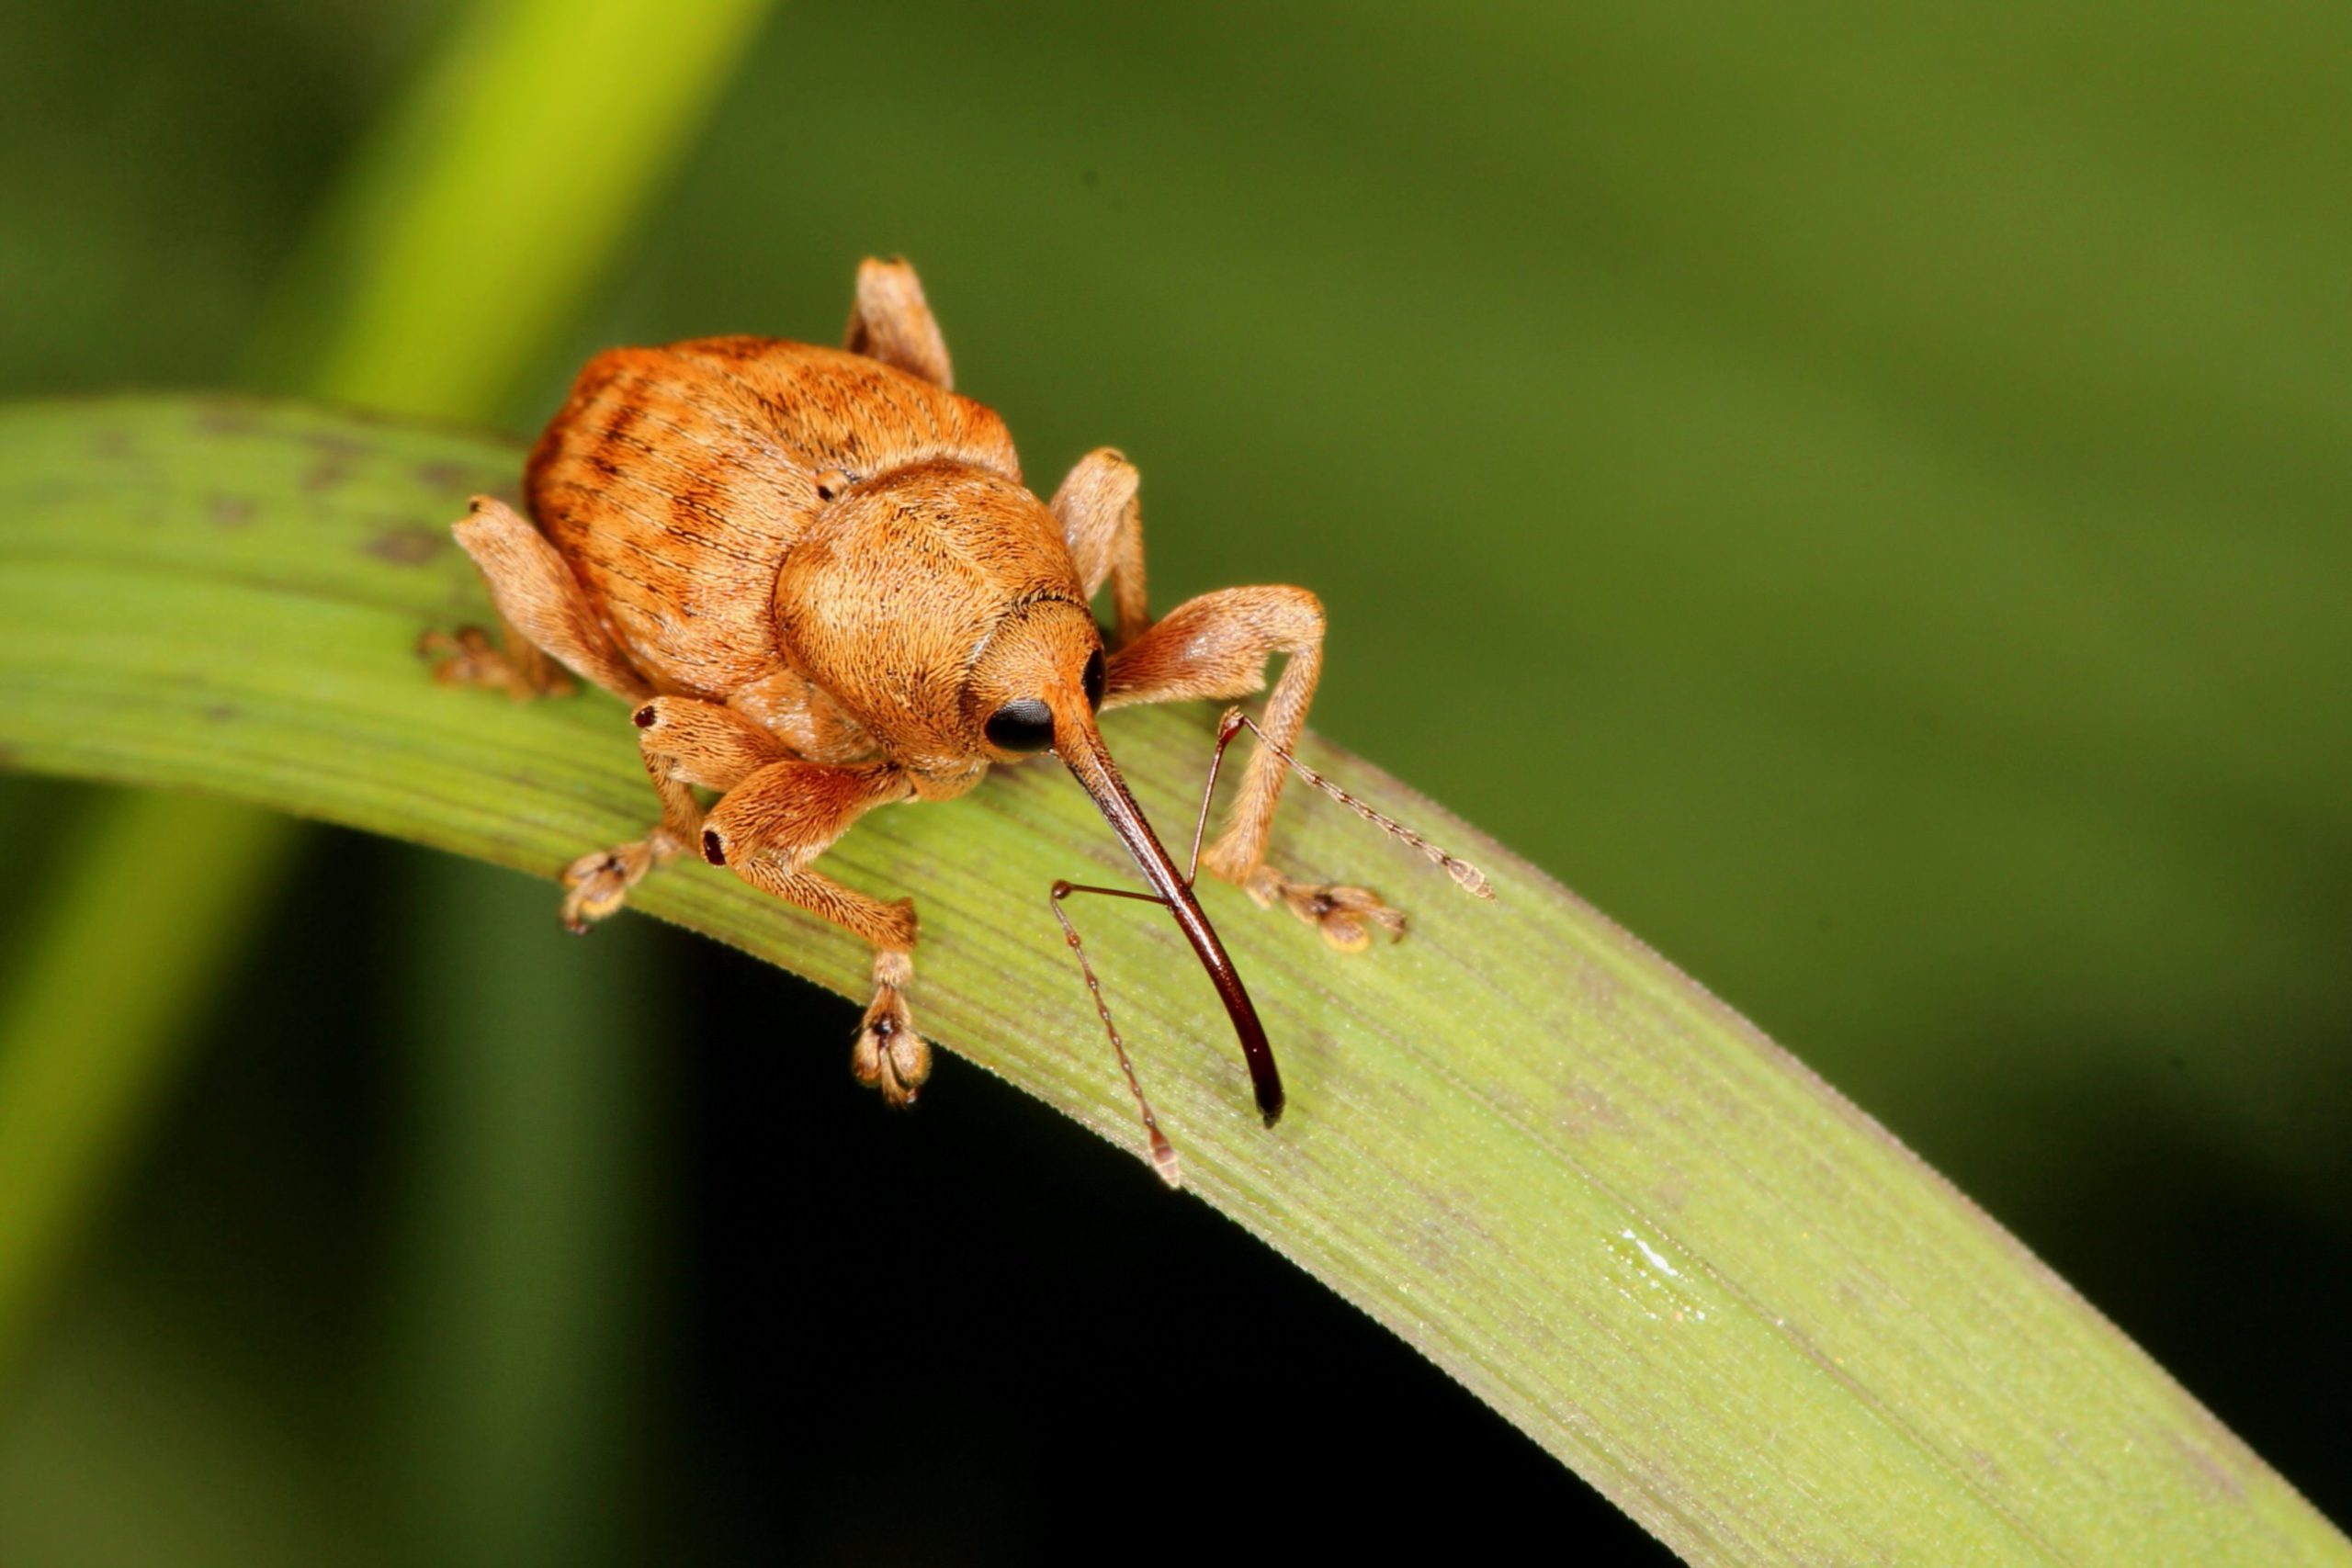 An acorn weevil, Curculio glandium, under an oak tree at the Stoneleigh Park showground in early May 2014.